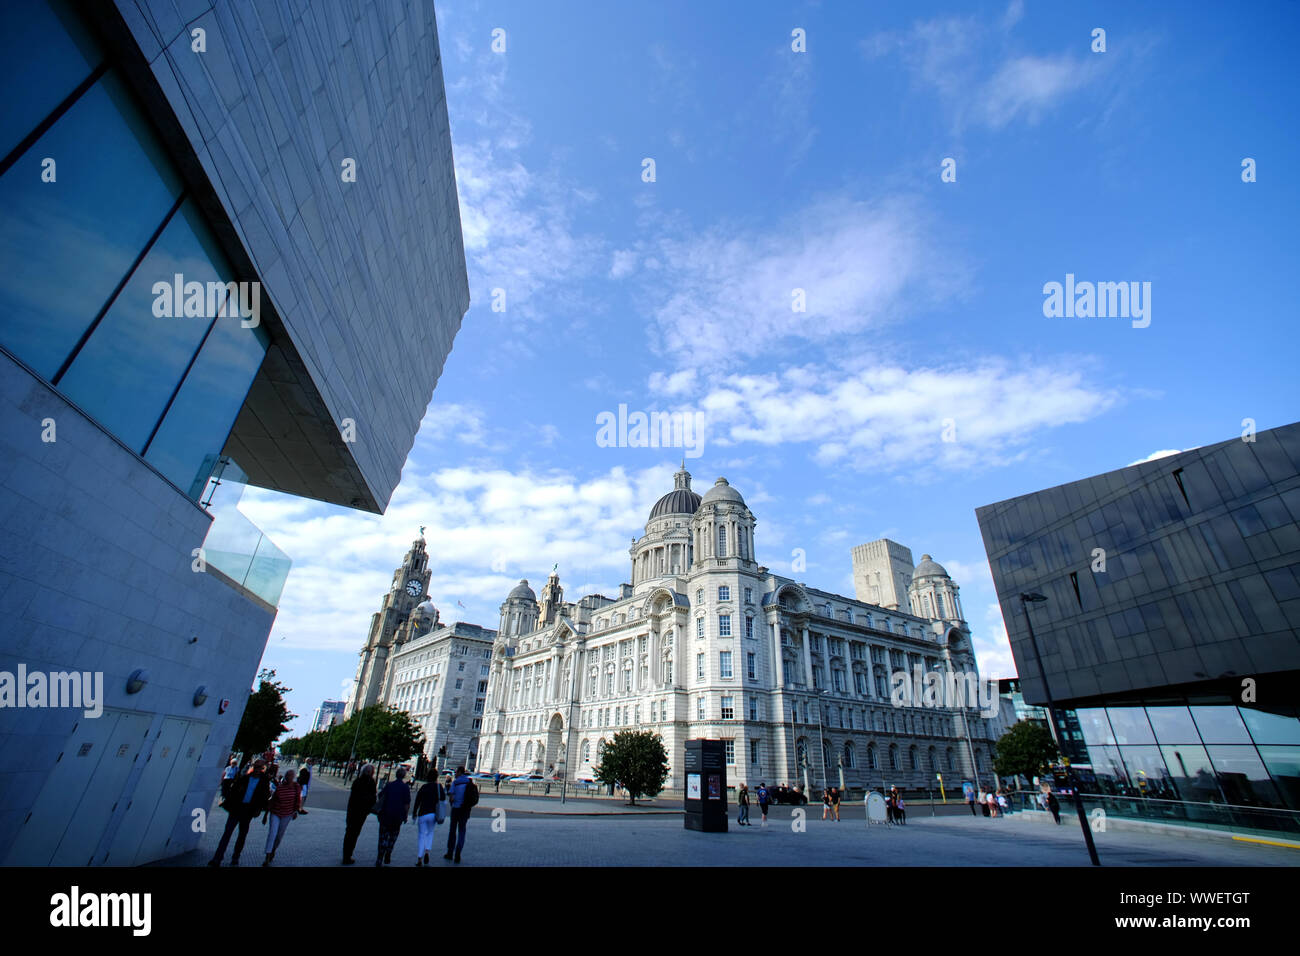 Port of Liverpool Building and Liver Building, Liverpool, Merseyside, UK Stock Photo